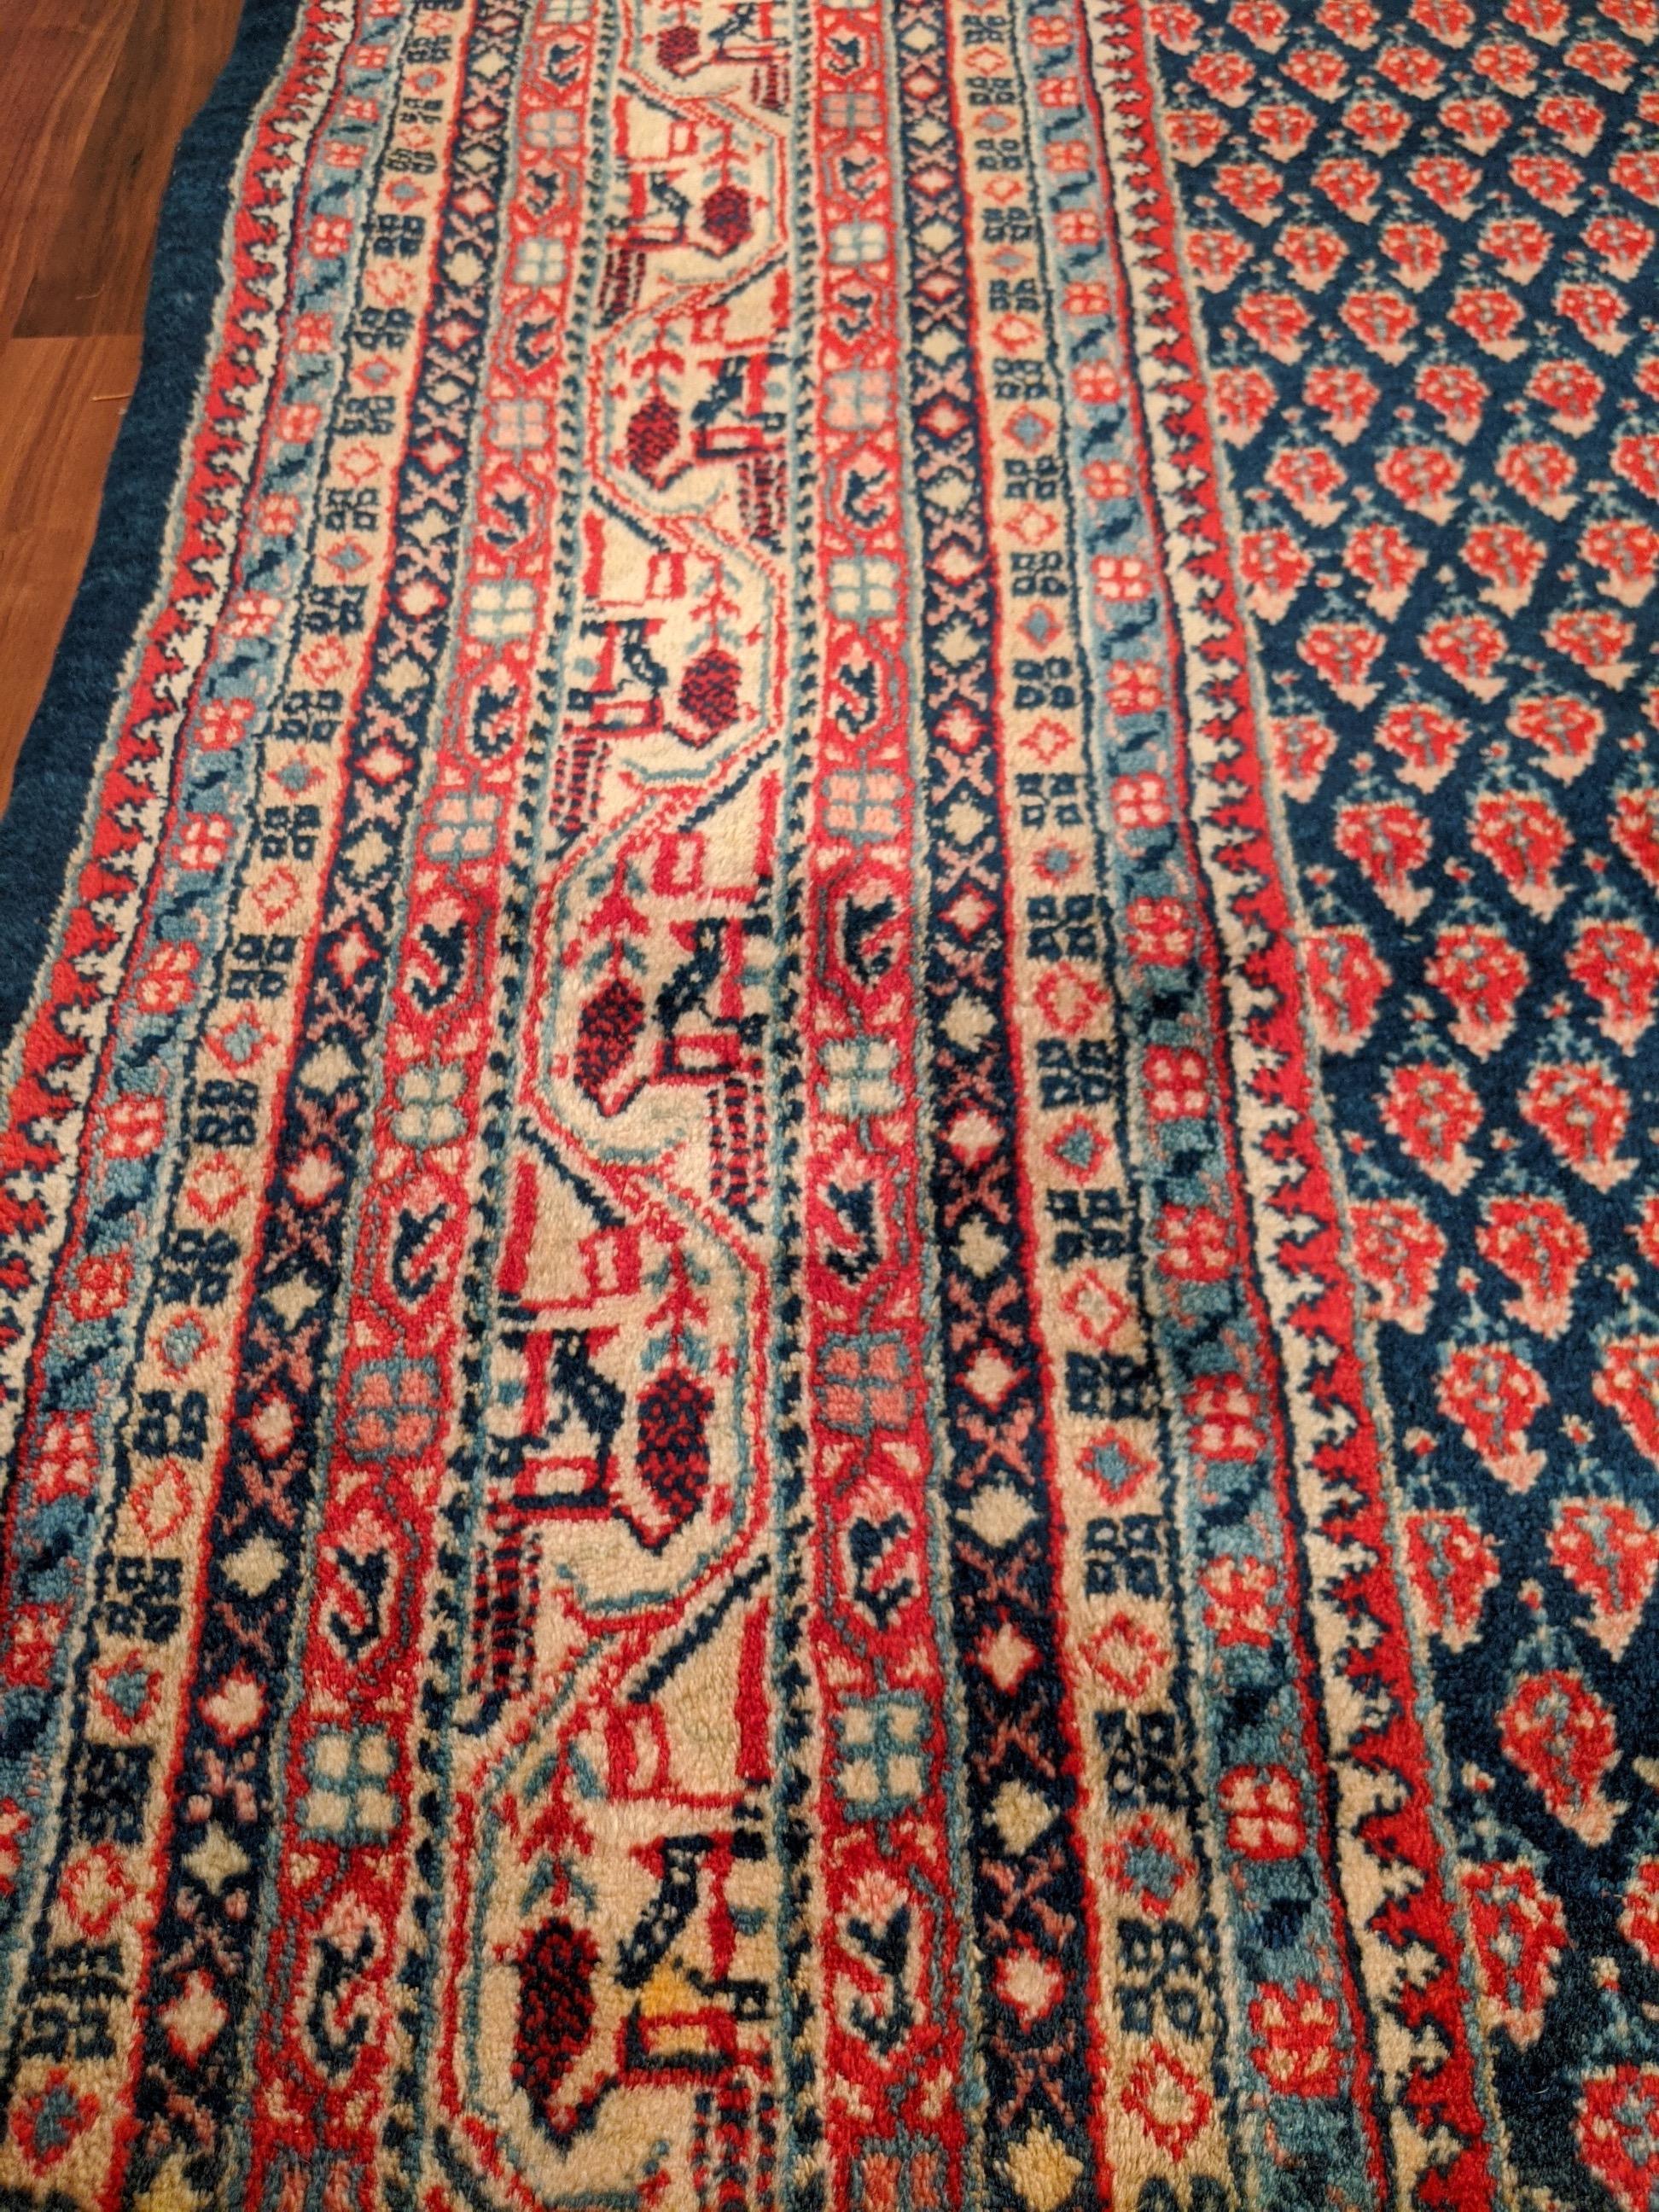 Wool Authentic Handknotted Persian Mir 1940s Rug 9'x12' For Sale